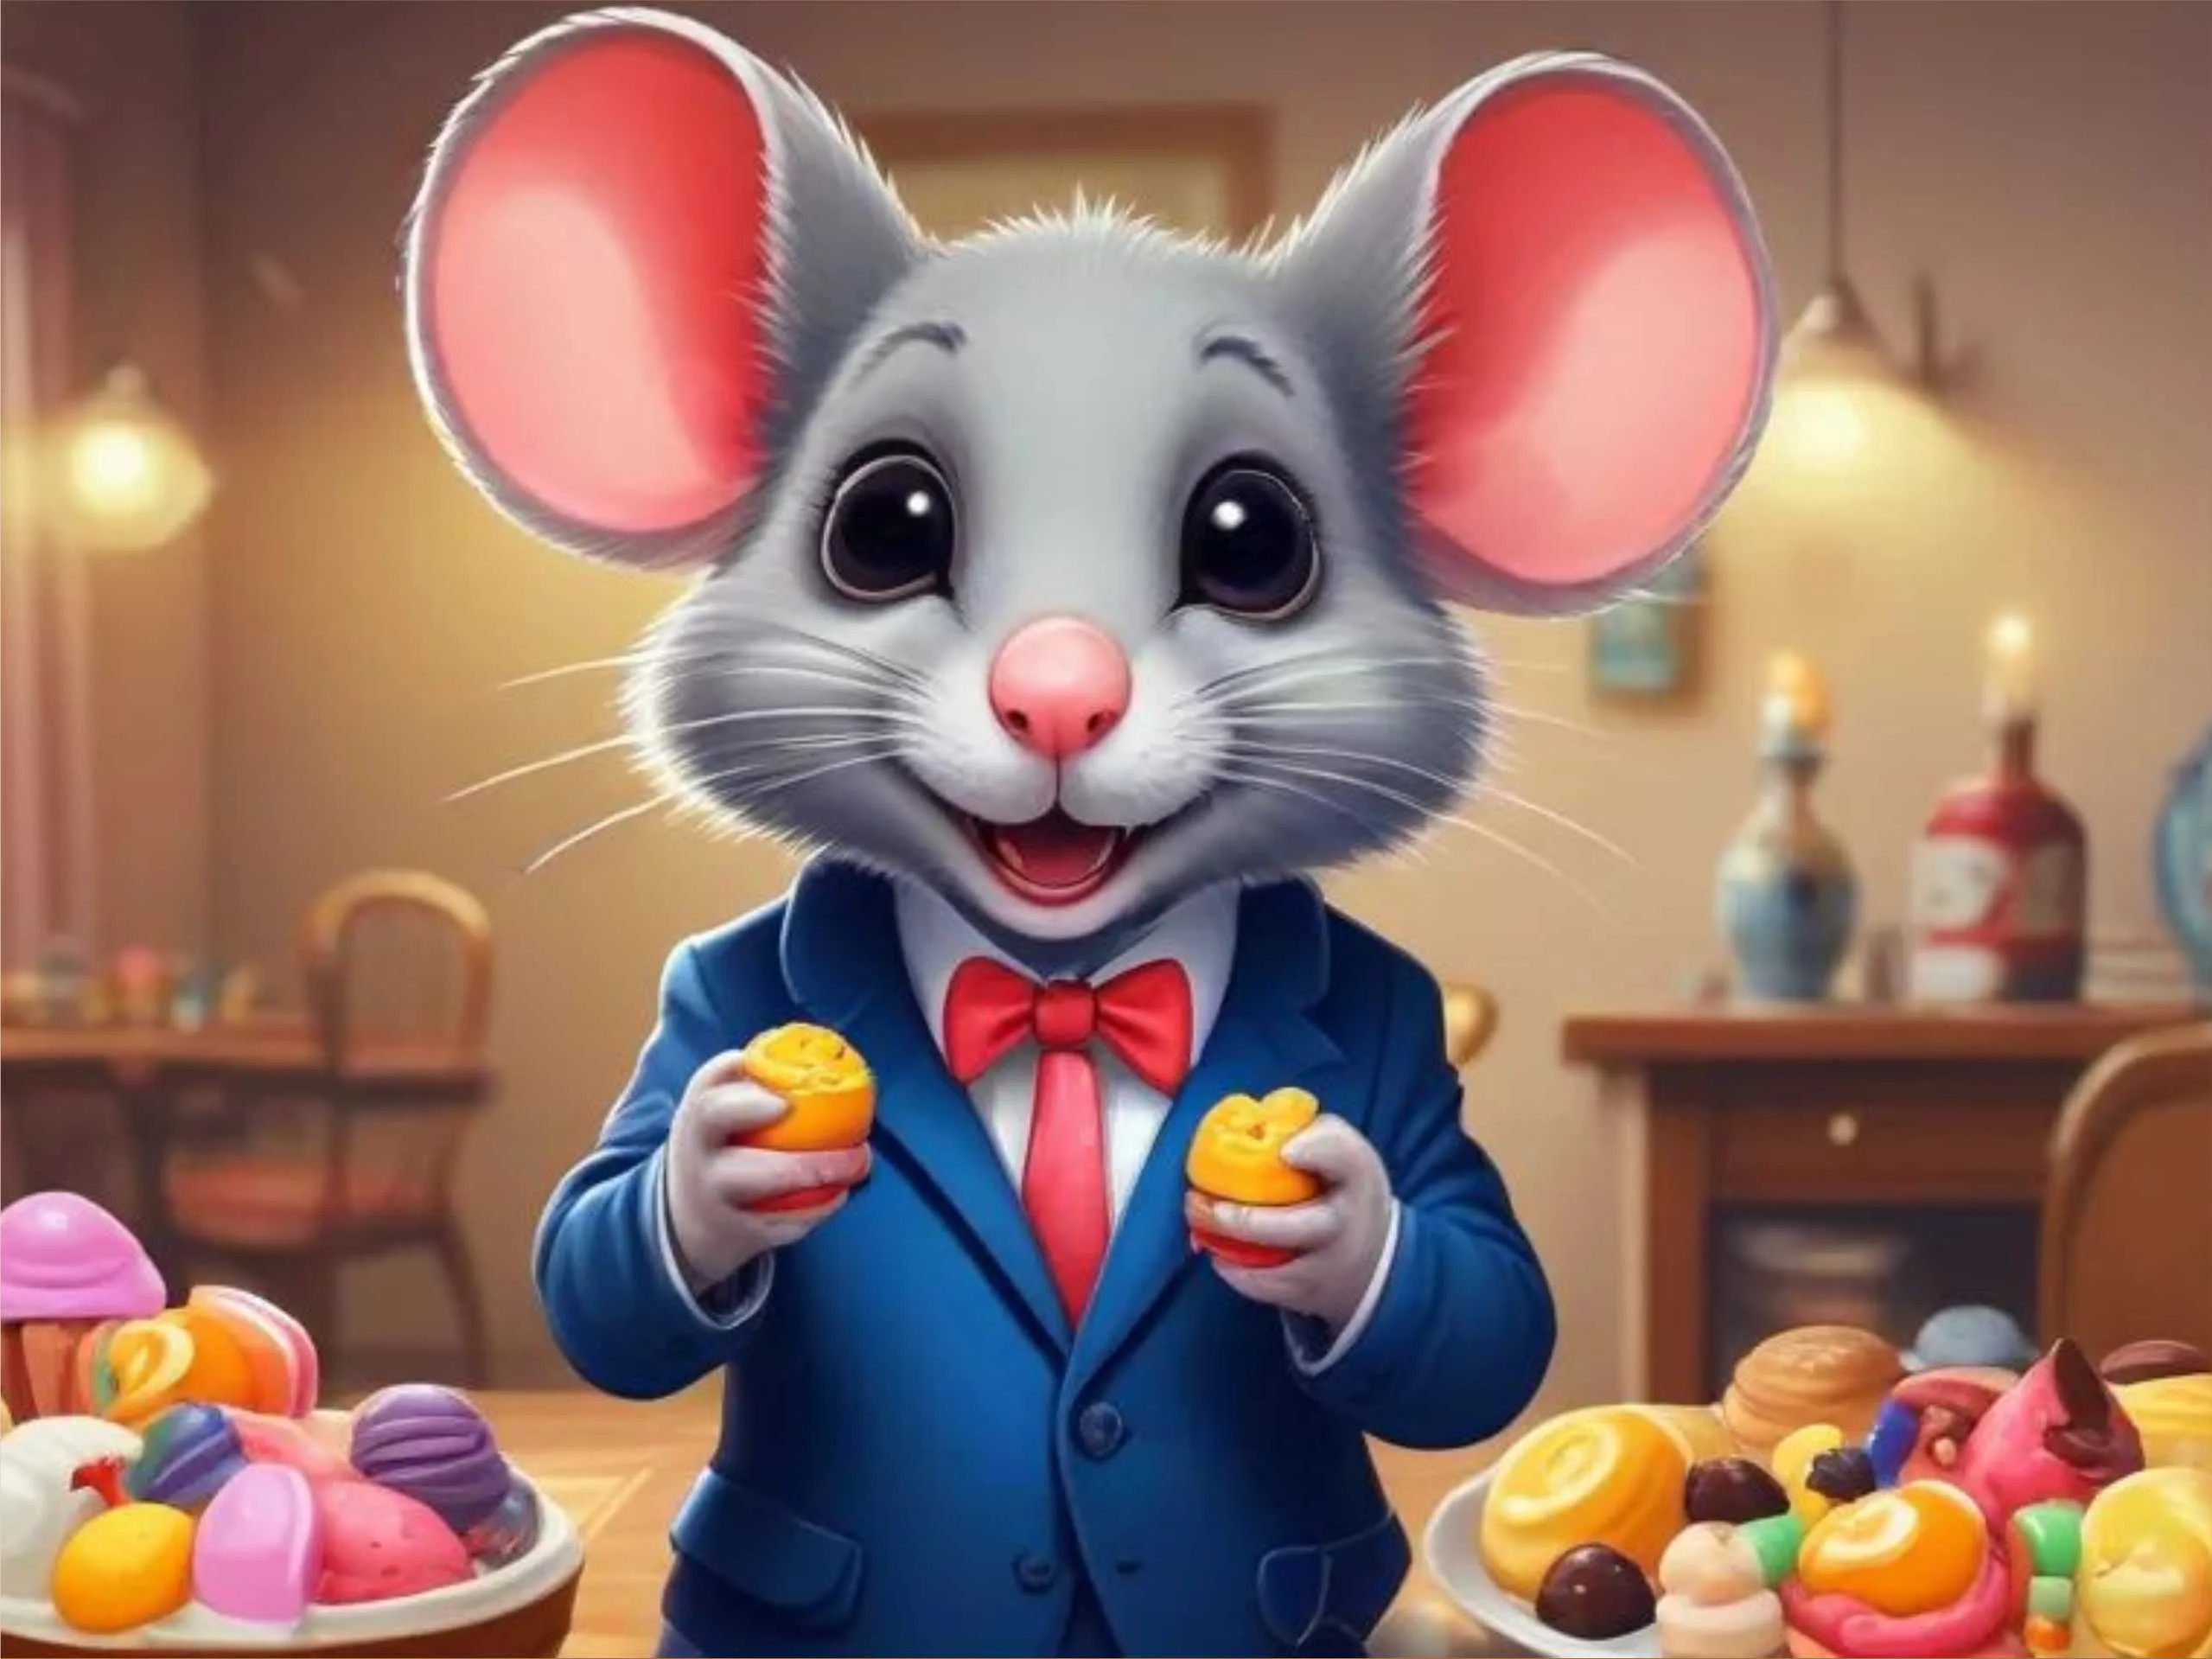 cartoon image of a mouse wearing suit eating sweets